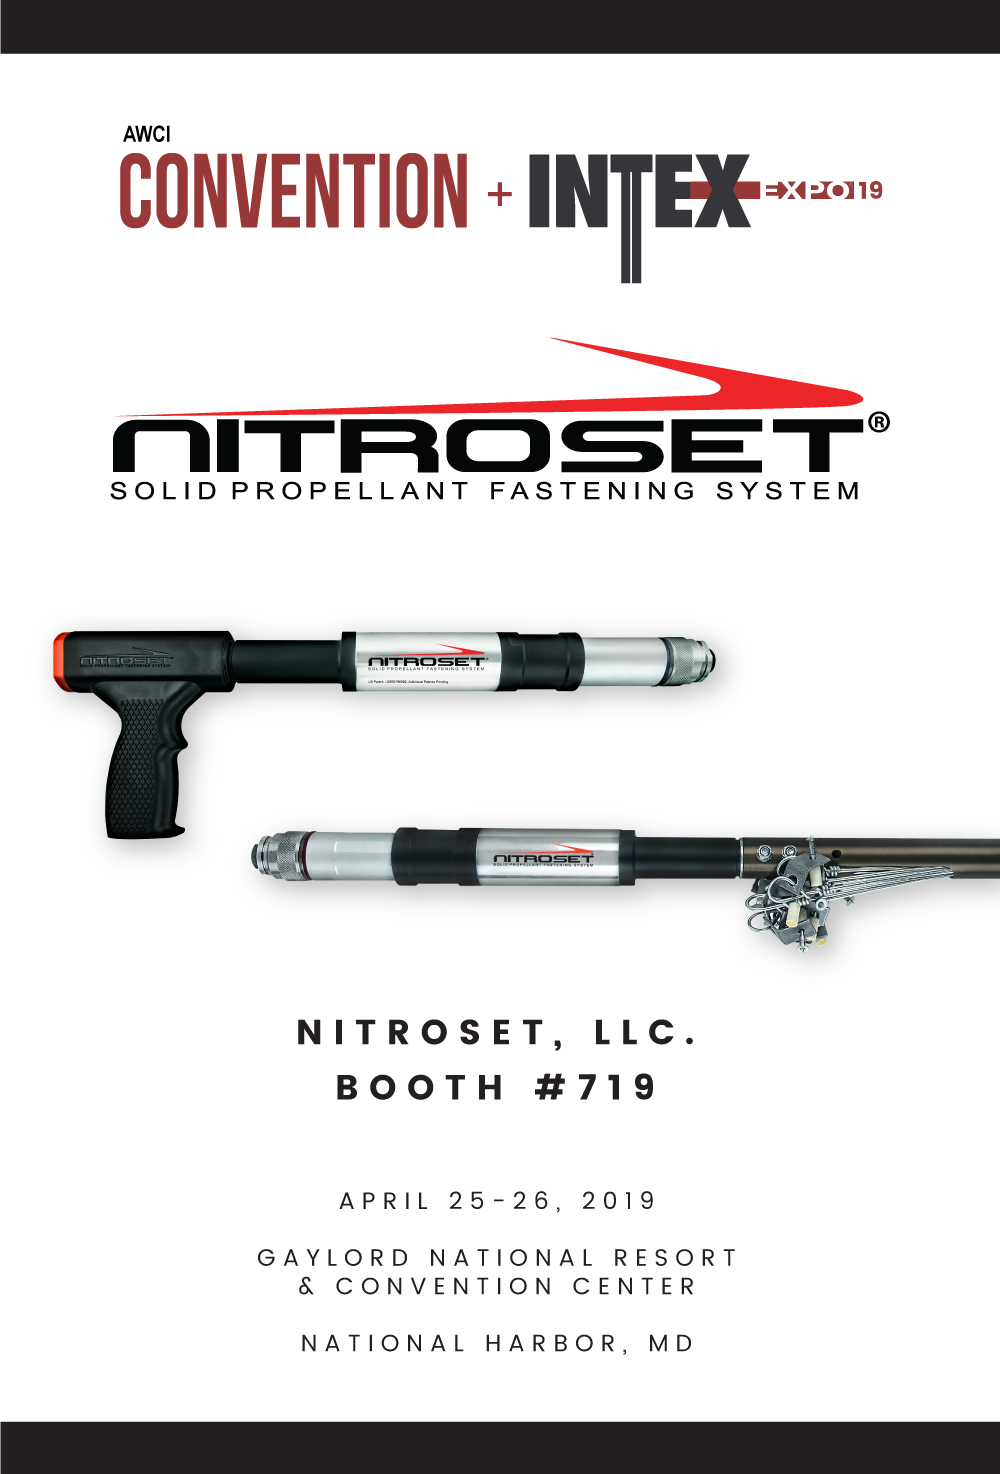 Come and Visit Us at AWCI Convention April 2526, 2019 Nitroset